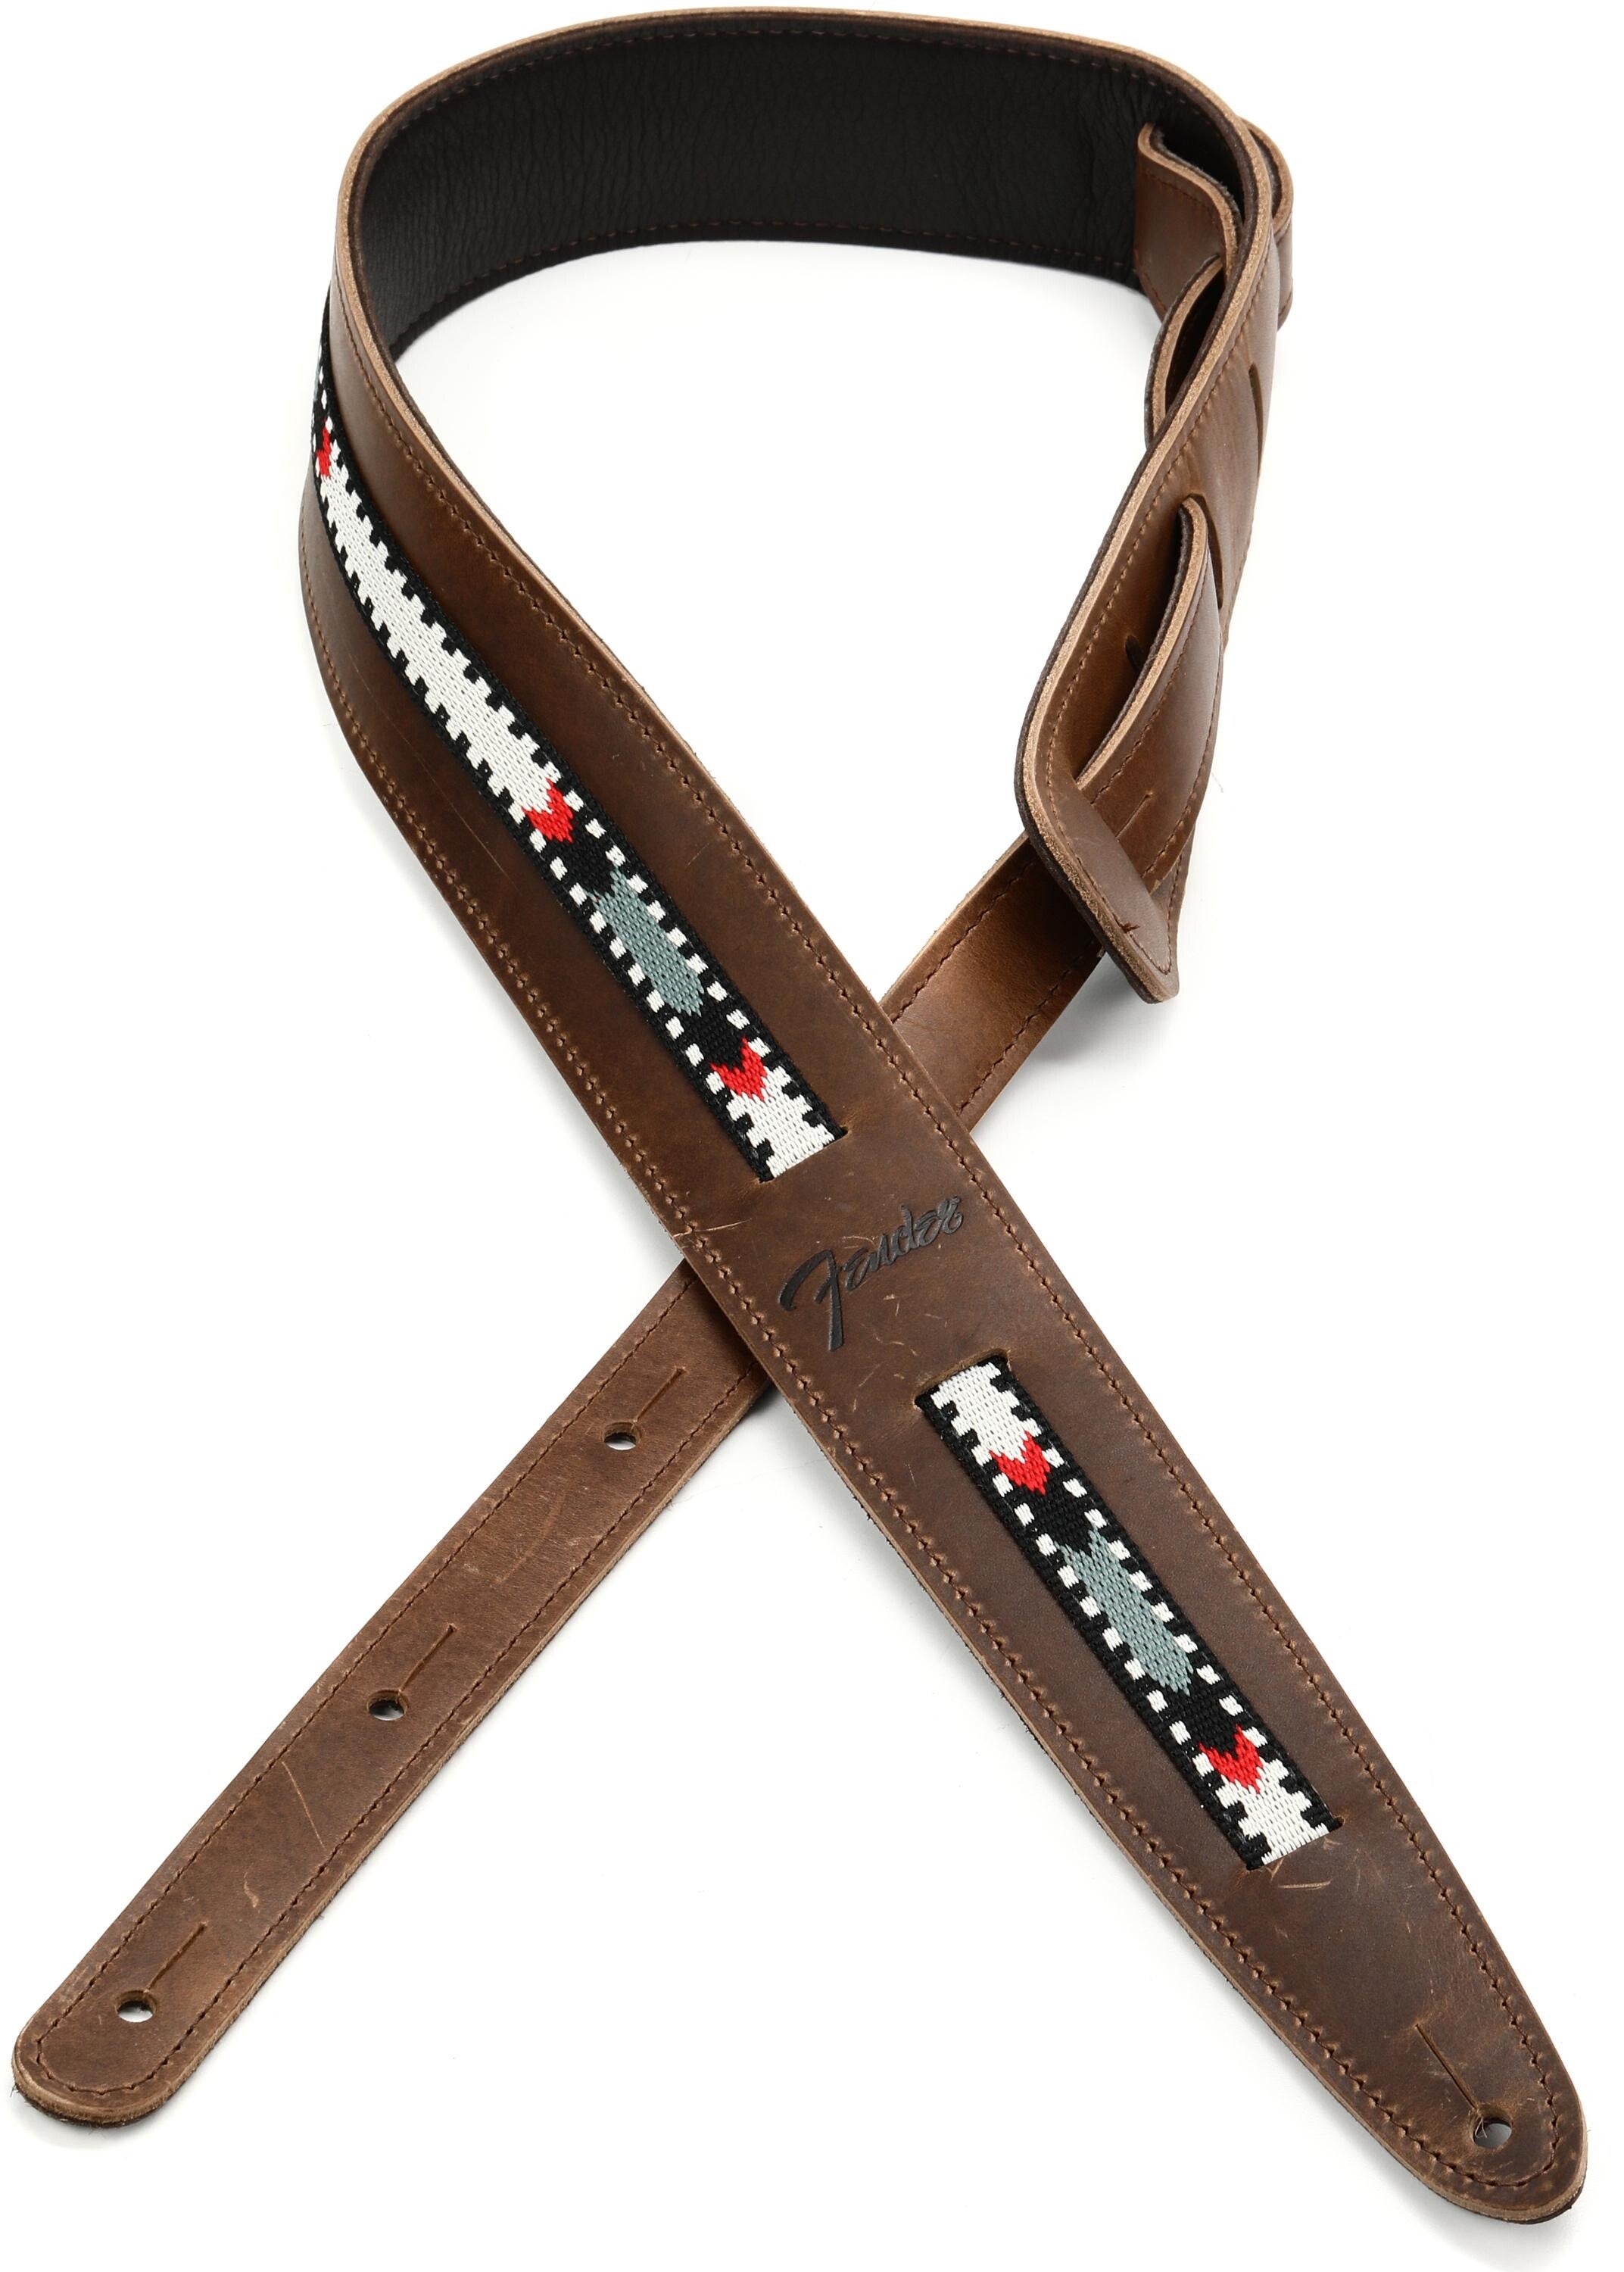 Acoustic guitar strap. Brown leather with cotton padding